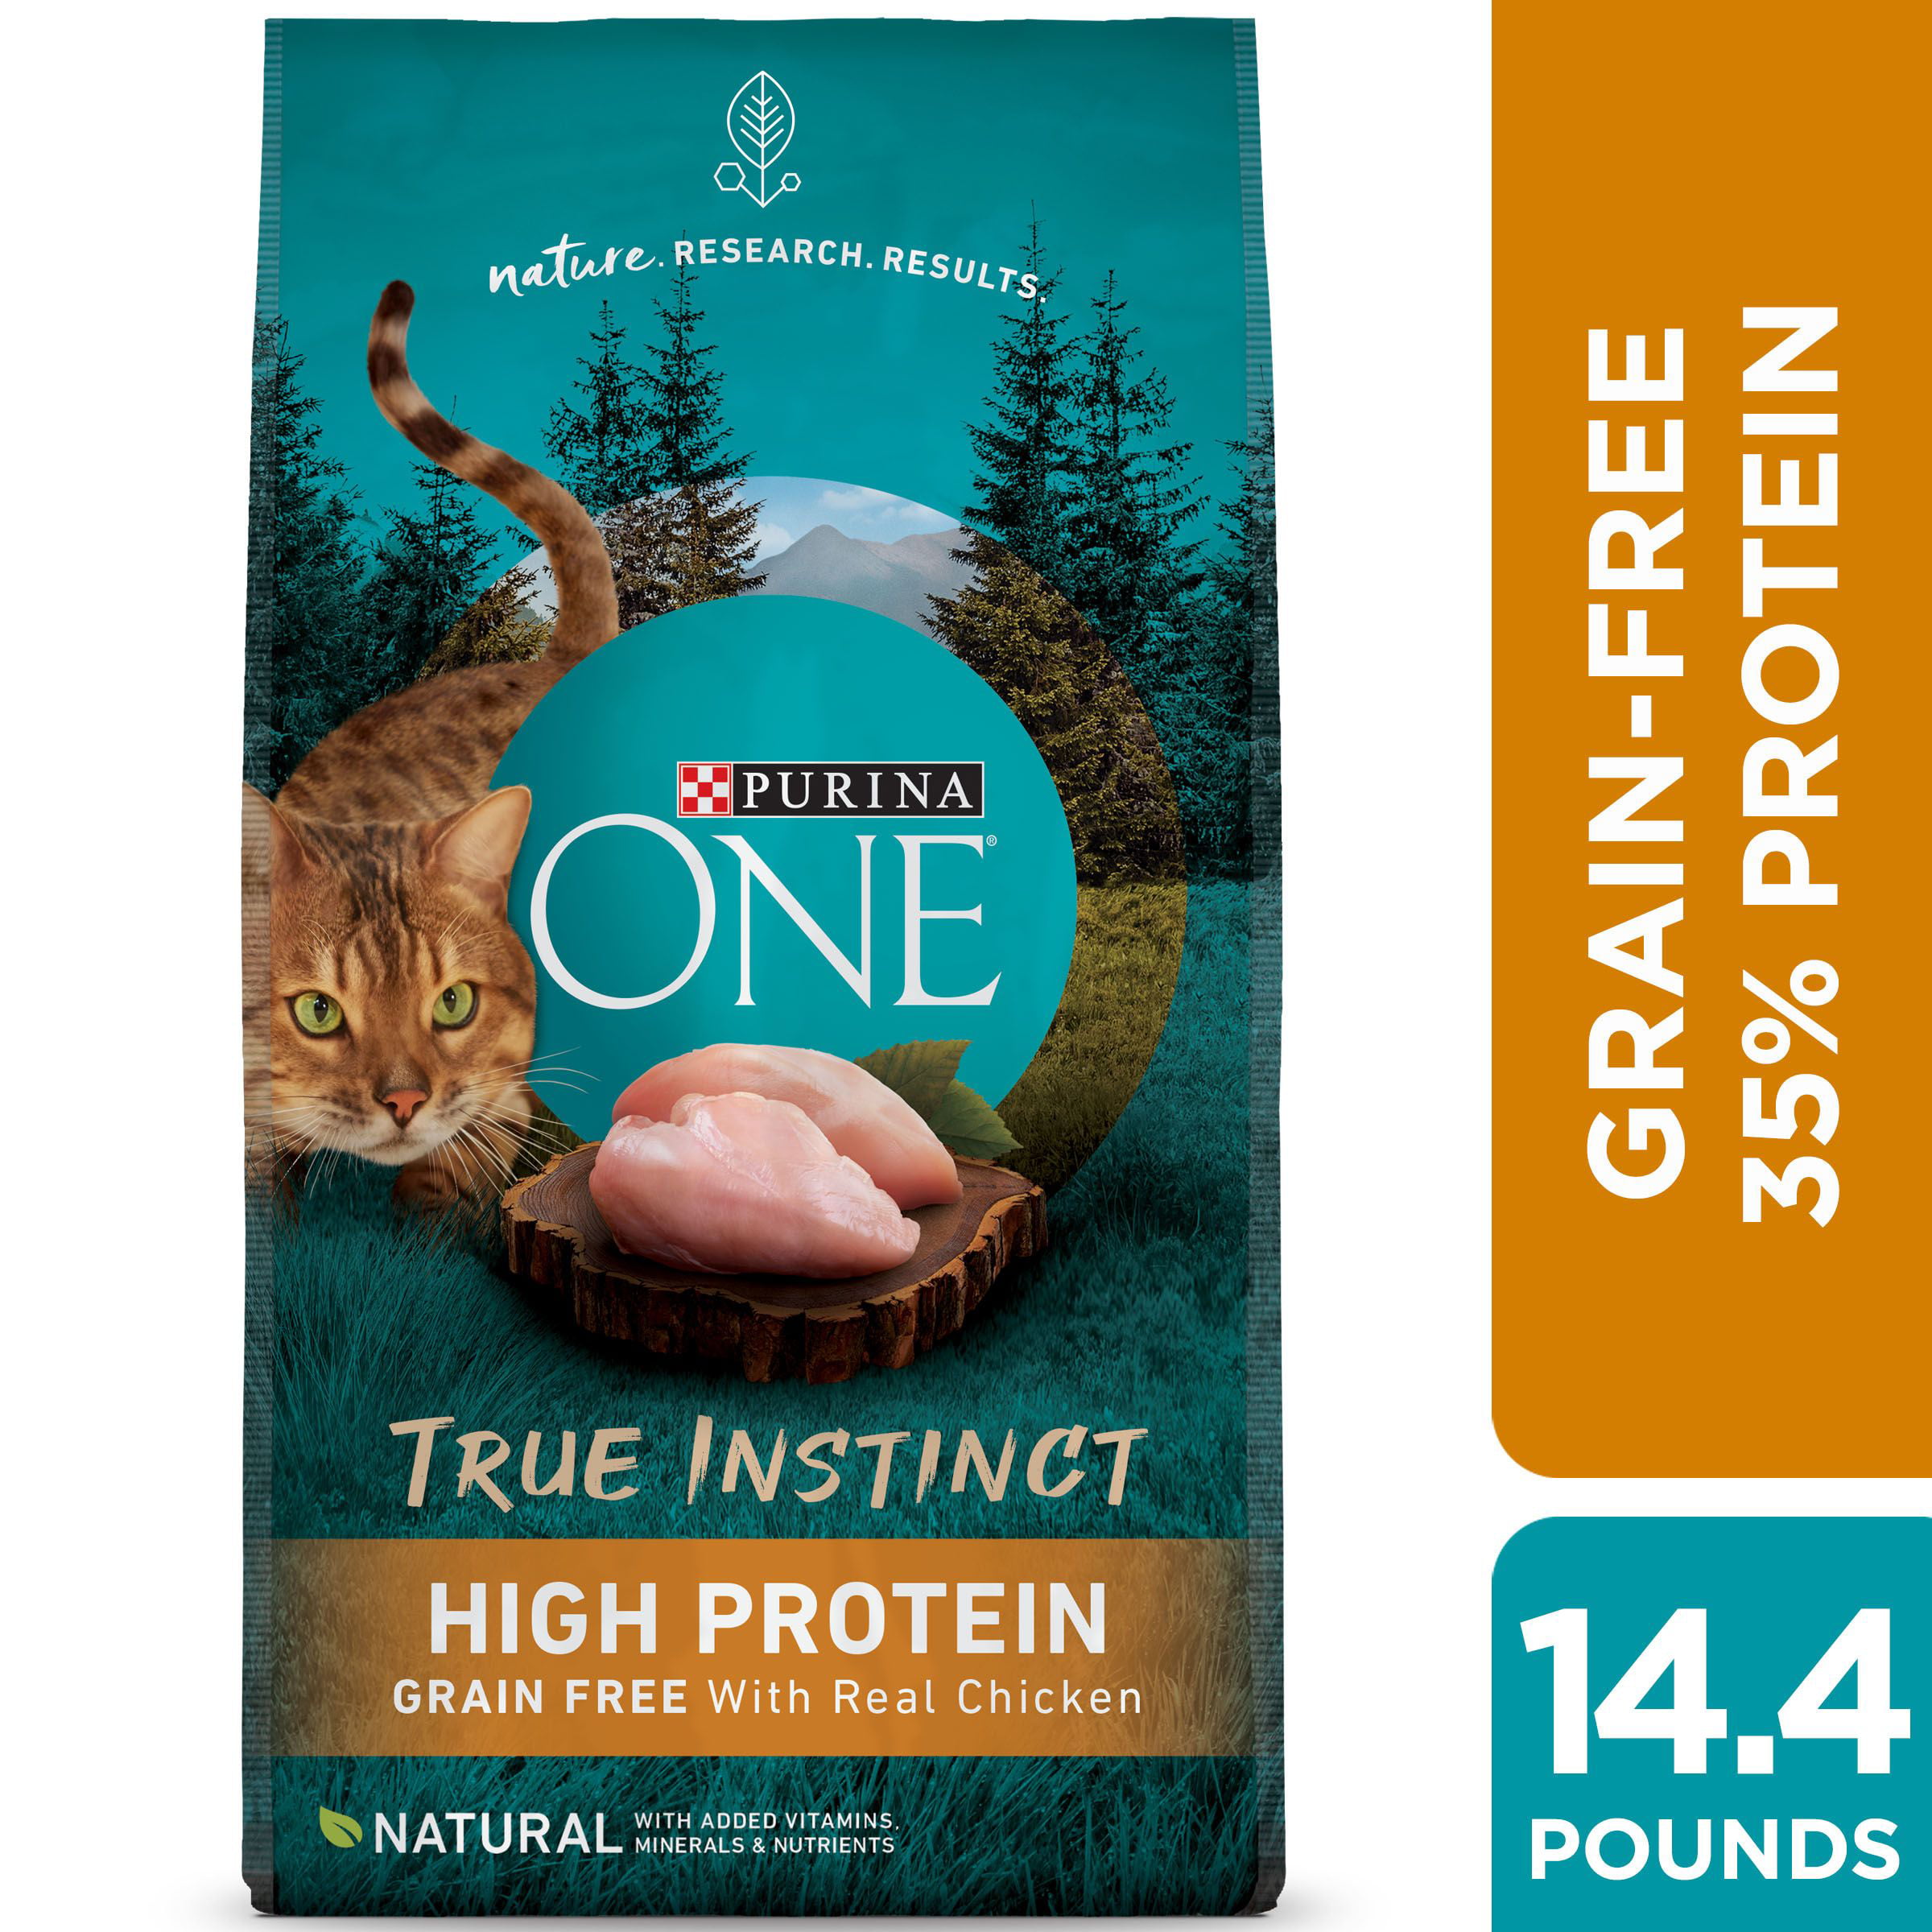 Purina ONE Natural, High Protein, Grain Free Dry Cat Food, True